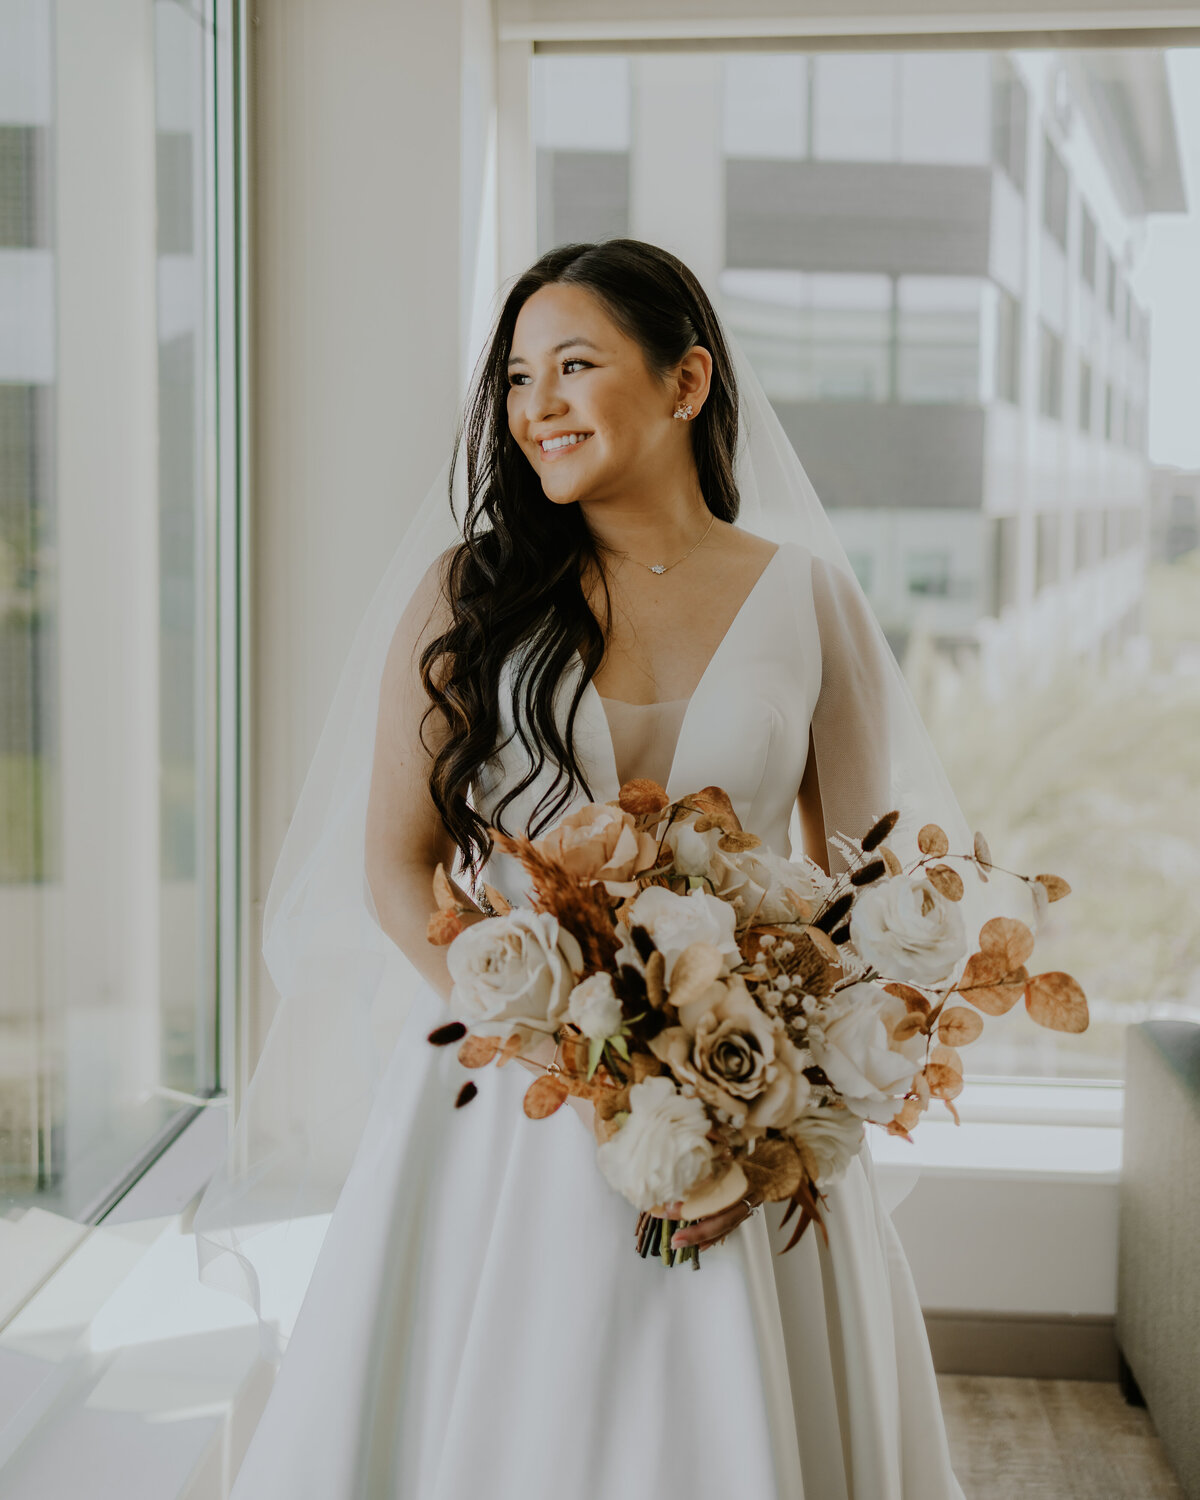 Bride looking out the window with beautiful autumn boho flower bouquet Temecula, California Wedding photographer Yescphotography